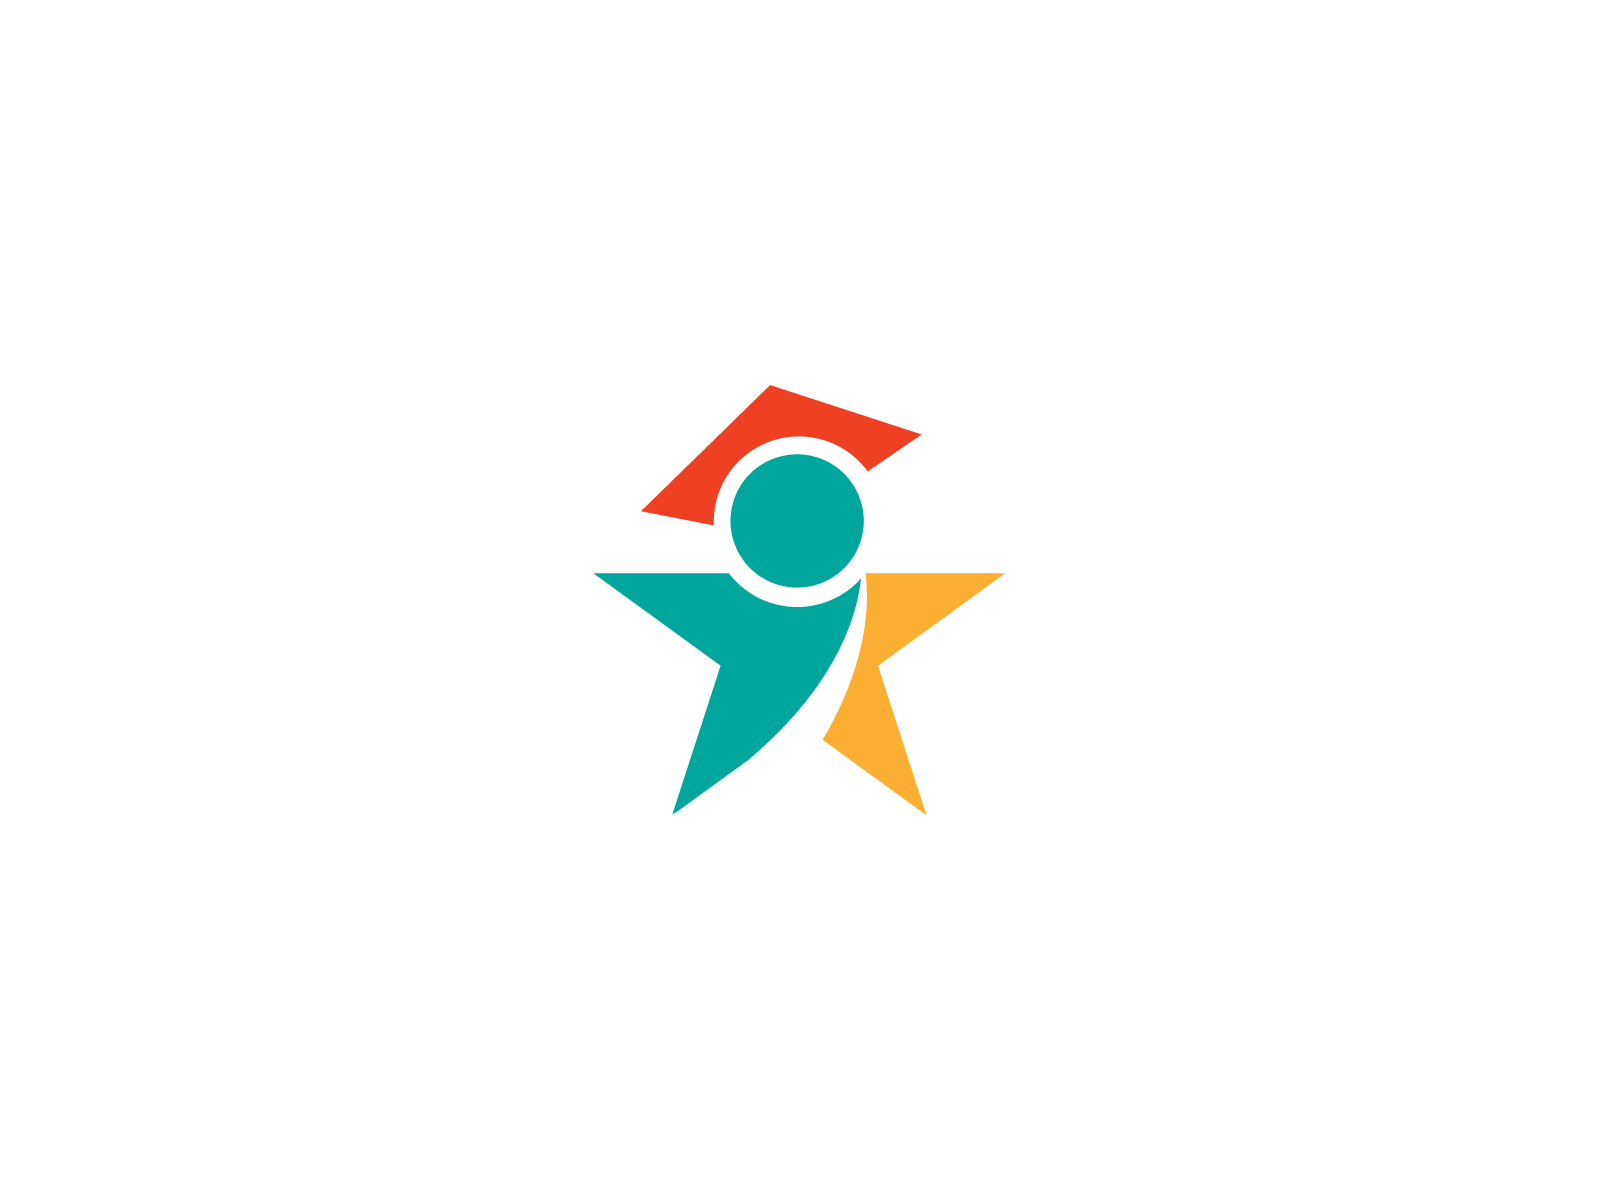 Star Student by Bhupesh on Dribbble